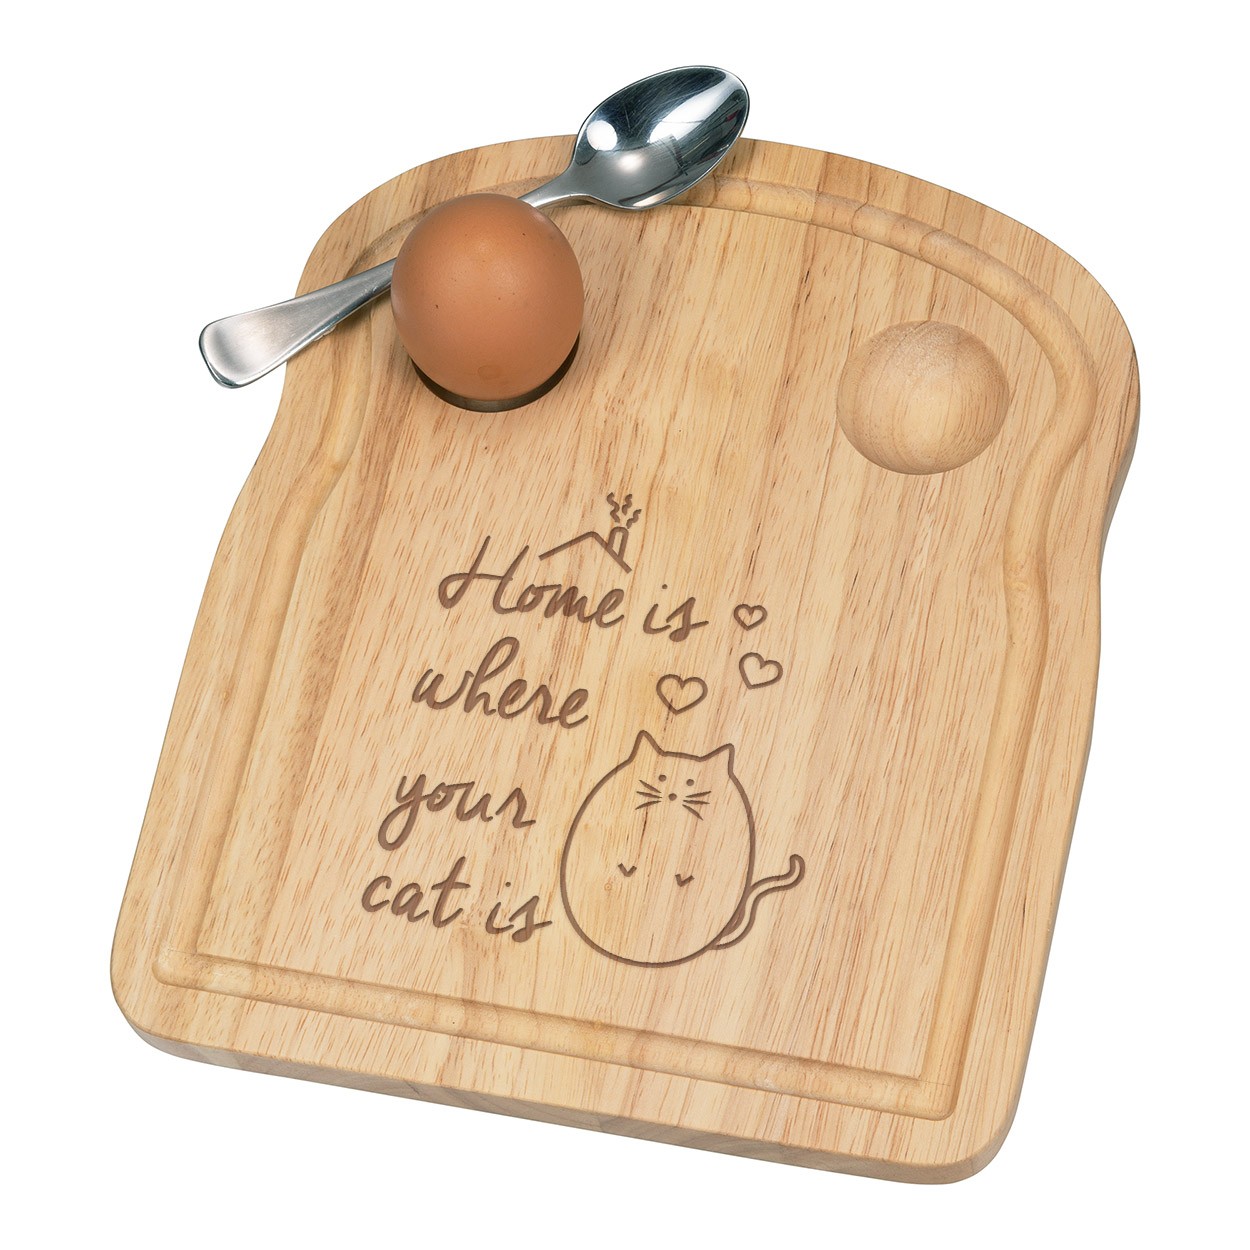 Home Is Where Your Cat Is Breakfast Dippy Egg Cup Board Wooden